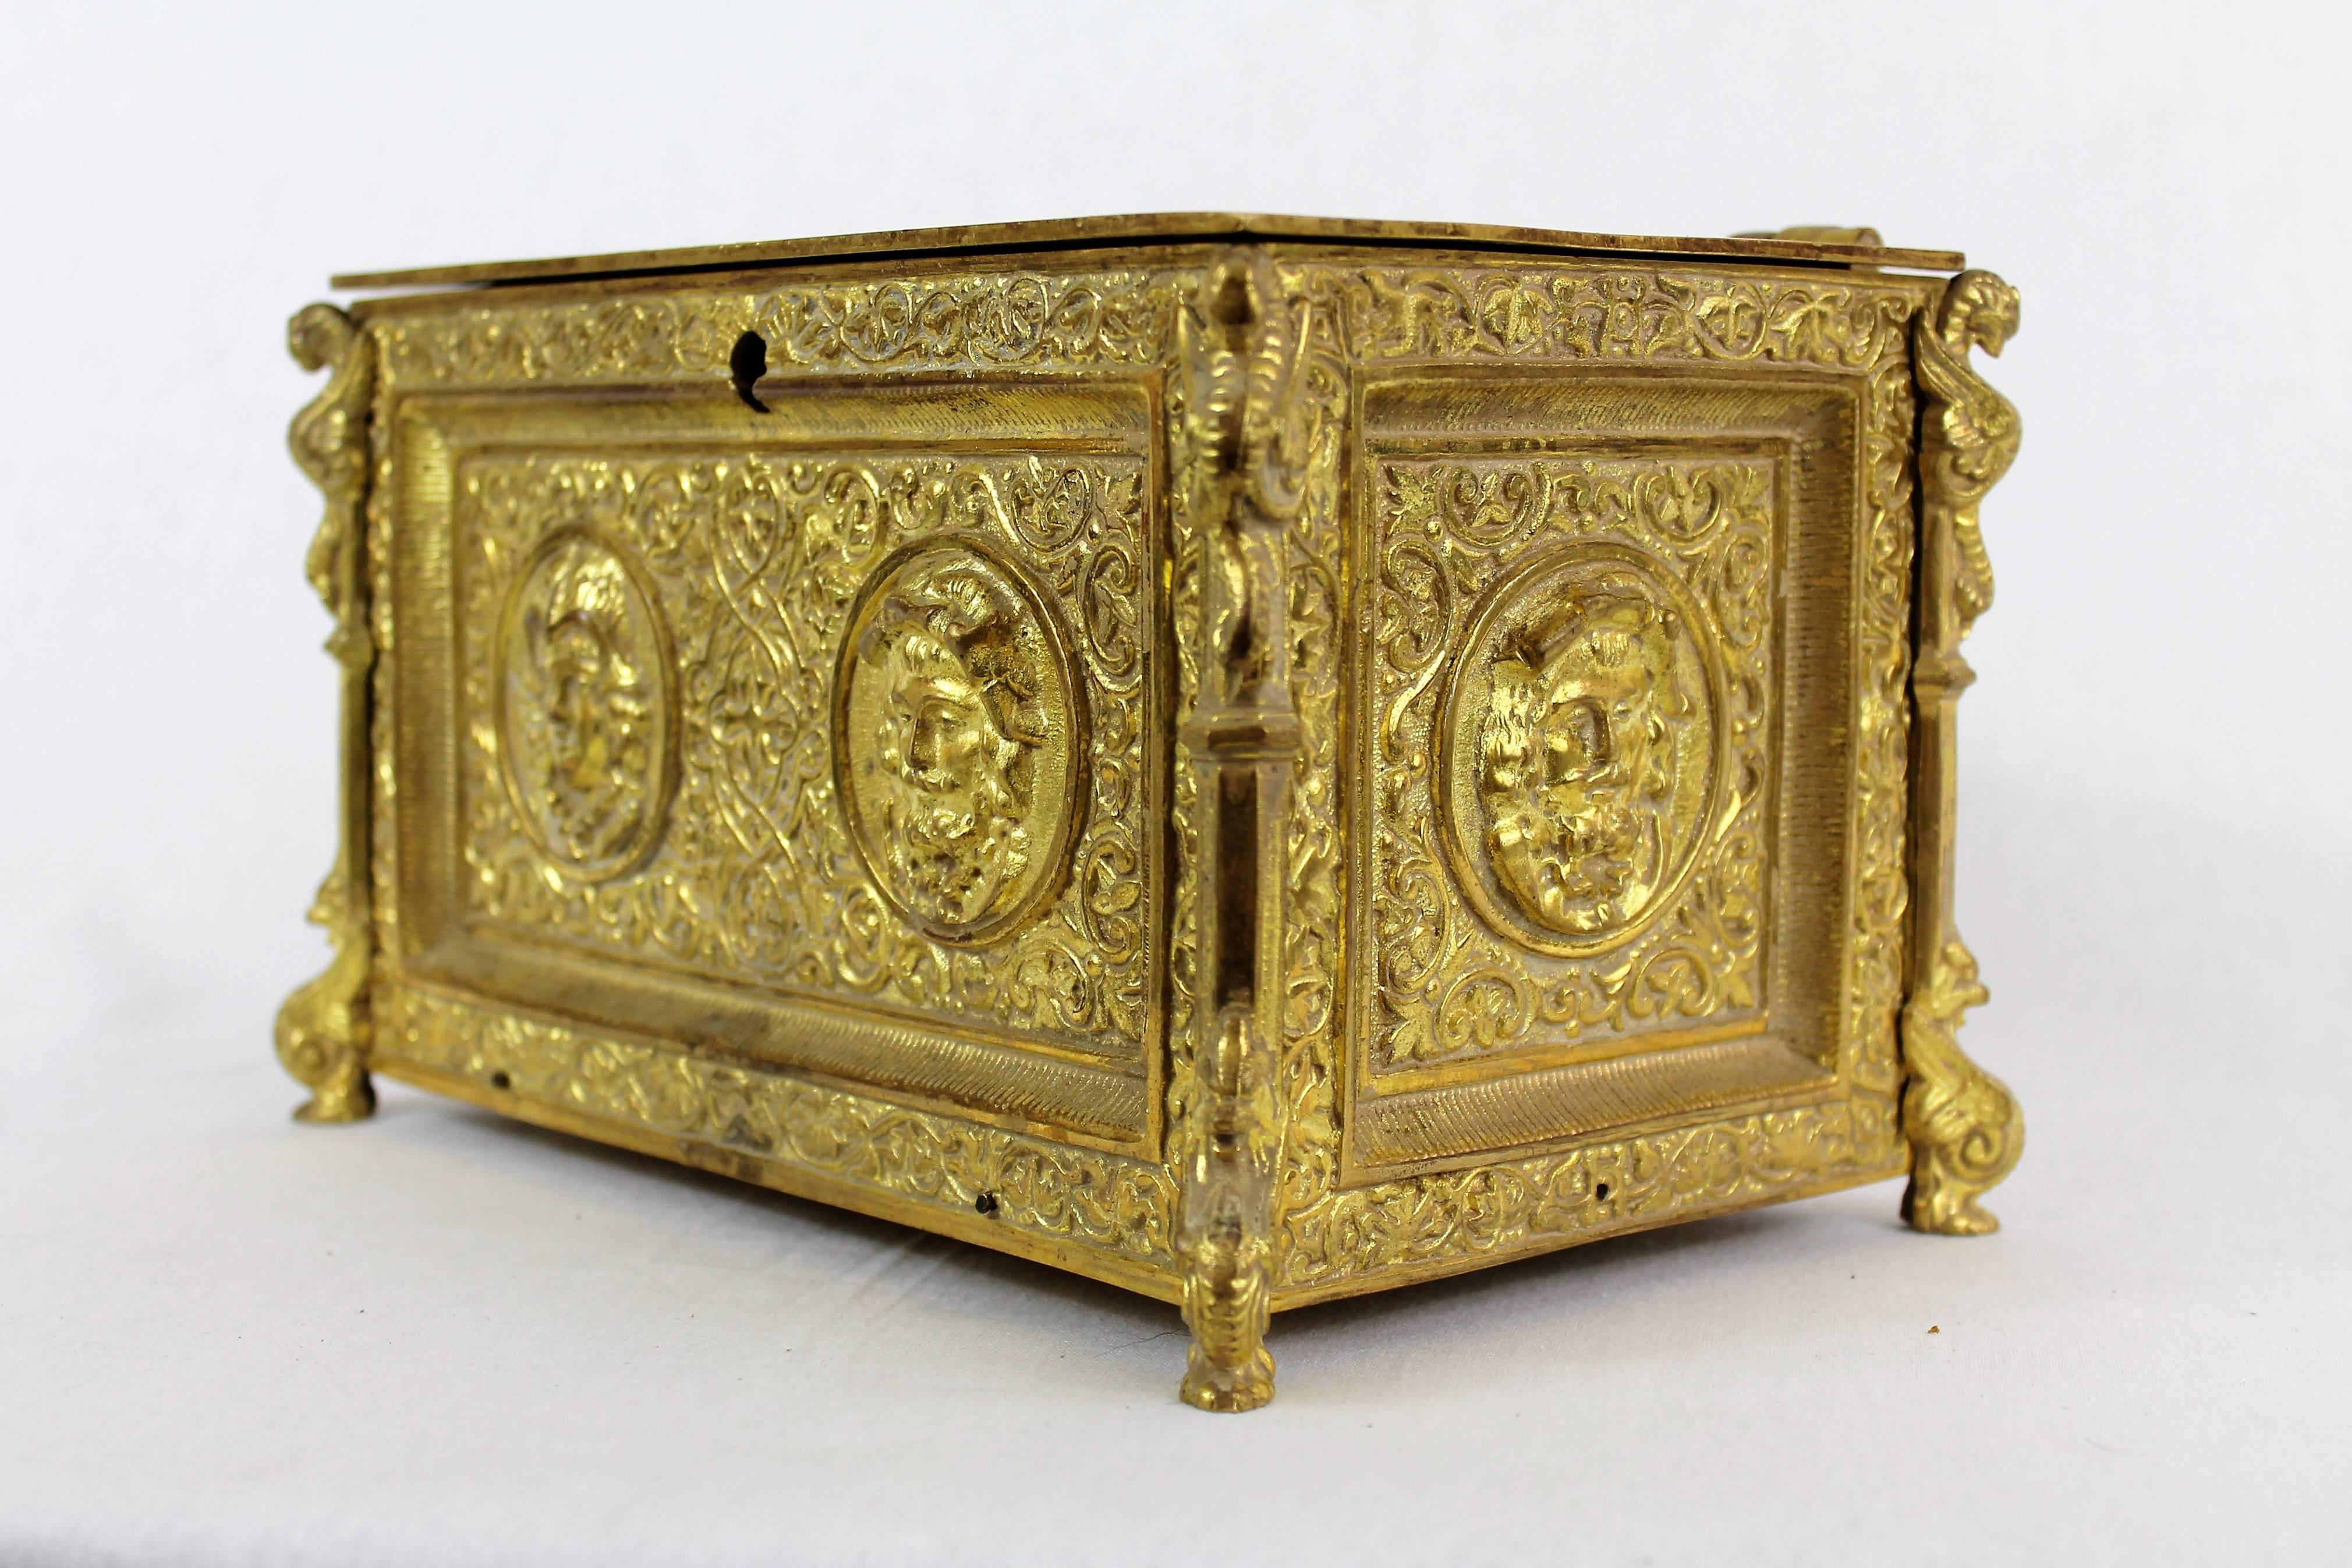 Beautiful gilt bronze jewelry box in Renaissance style decorated with medallions of portrait of men and women, surrounded by foliage. The posts are decorated with sphinxes and chimeras. The interior is trimmed with mahogany inserts.